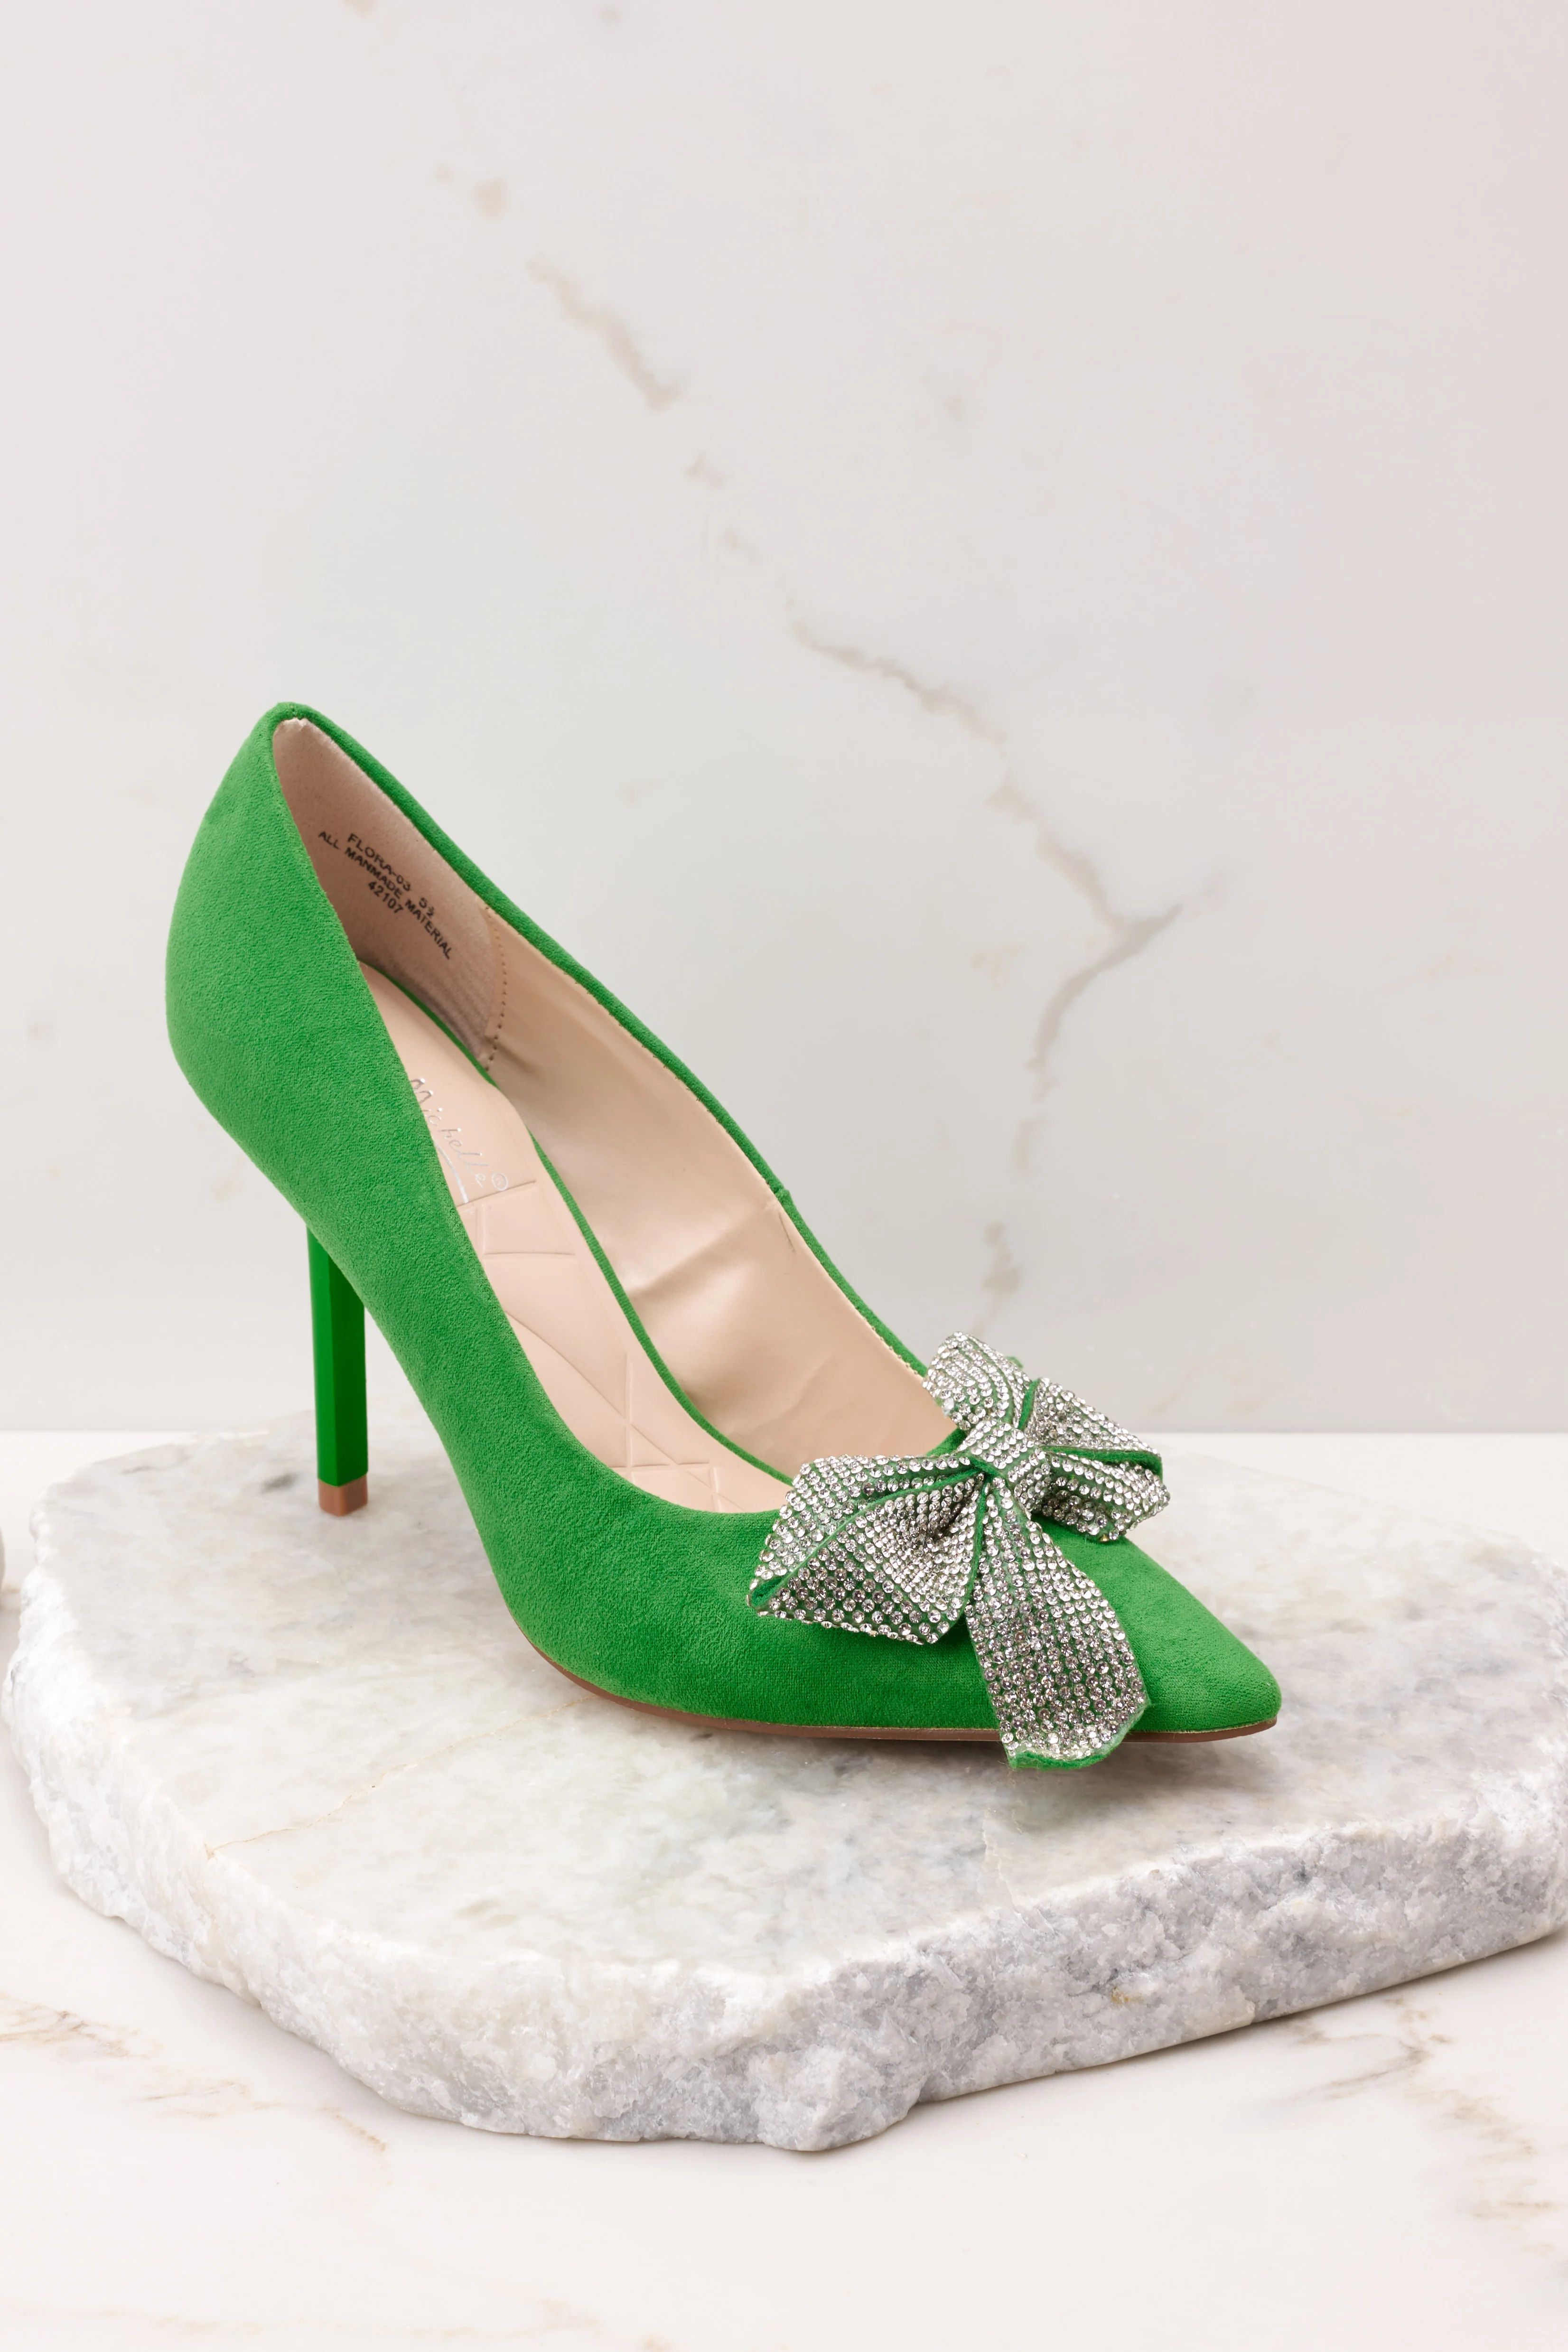 Marvel At These Green Heels | Red Dress 